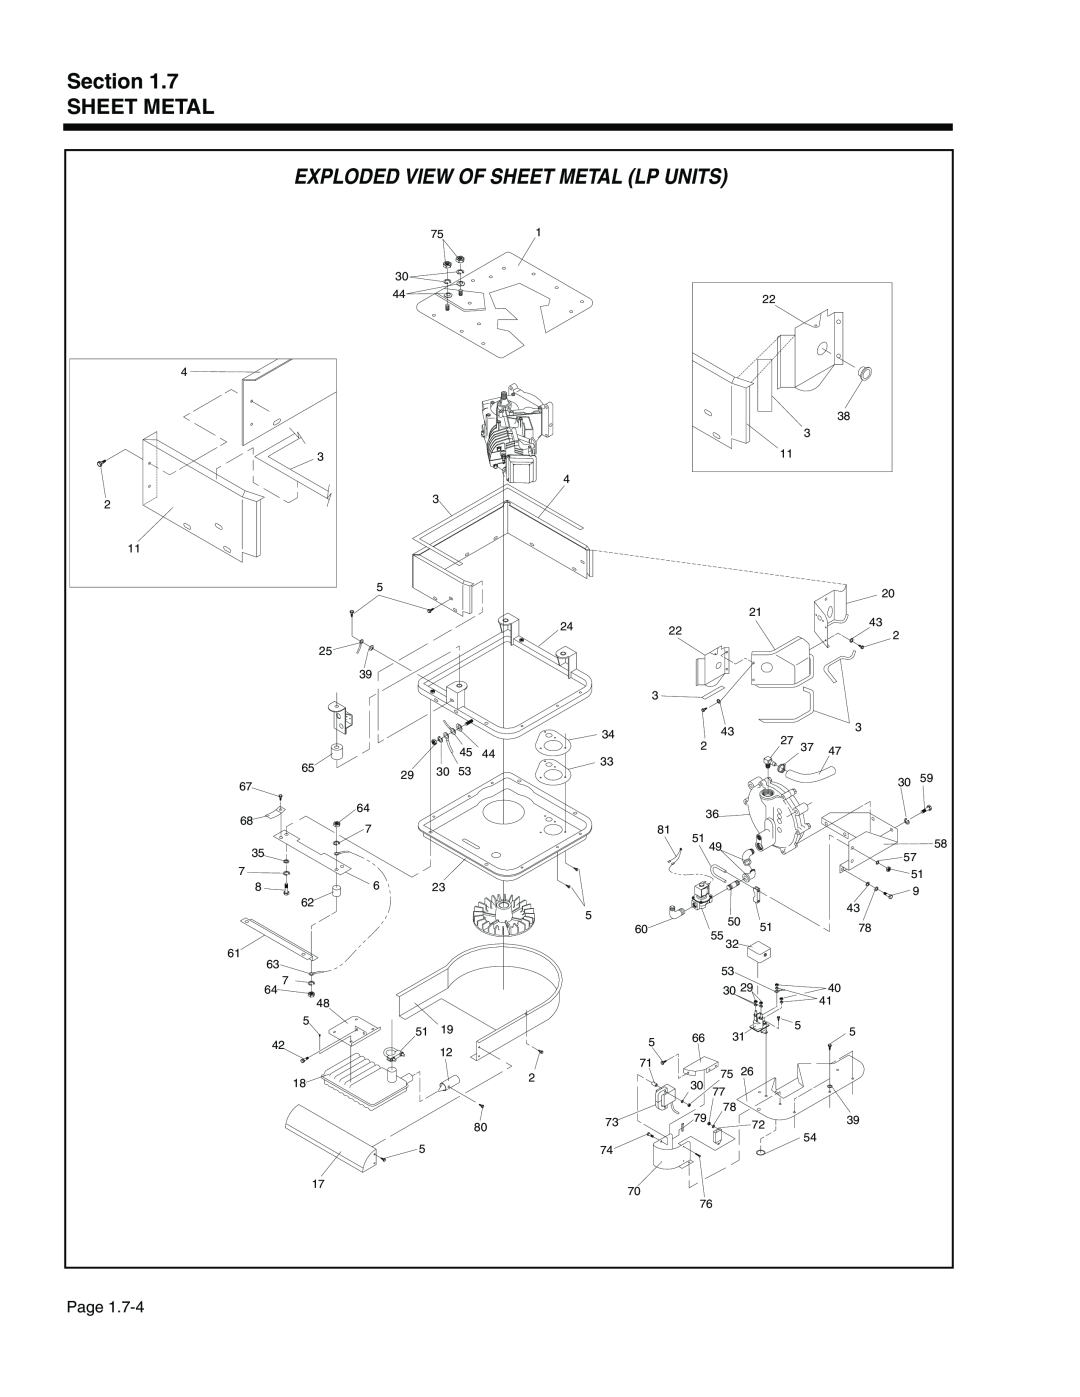 Generac Power Systems 940-2, 941-2 service manual Exploded View Of Sheet Metal Lp Units, Section SHEET METAL, Page 